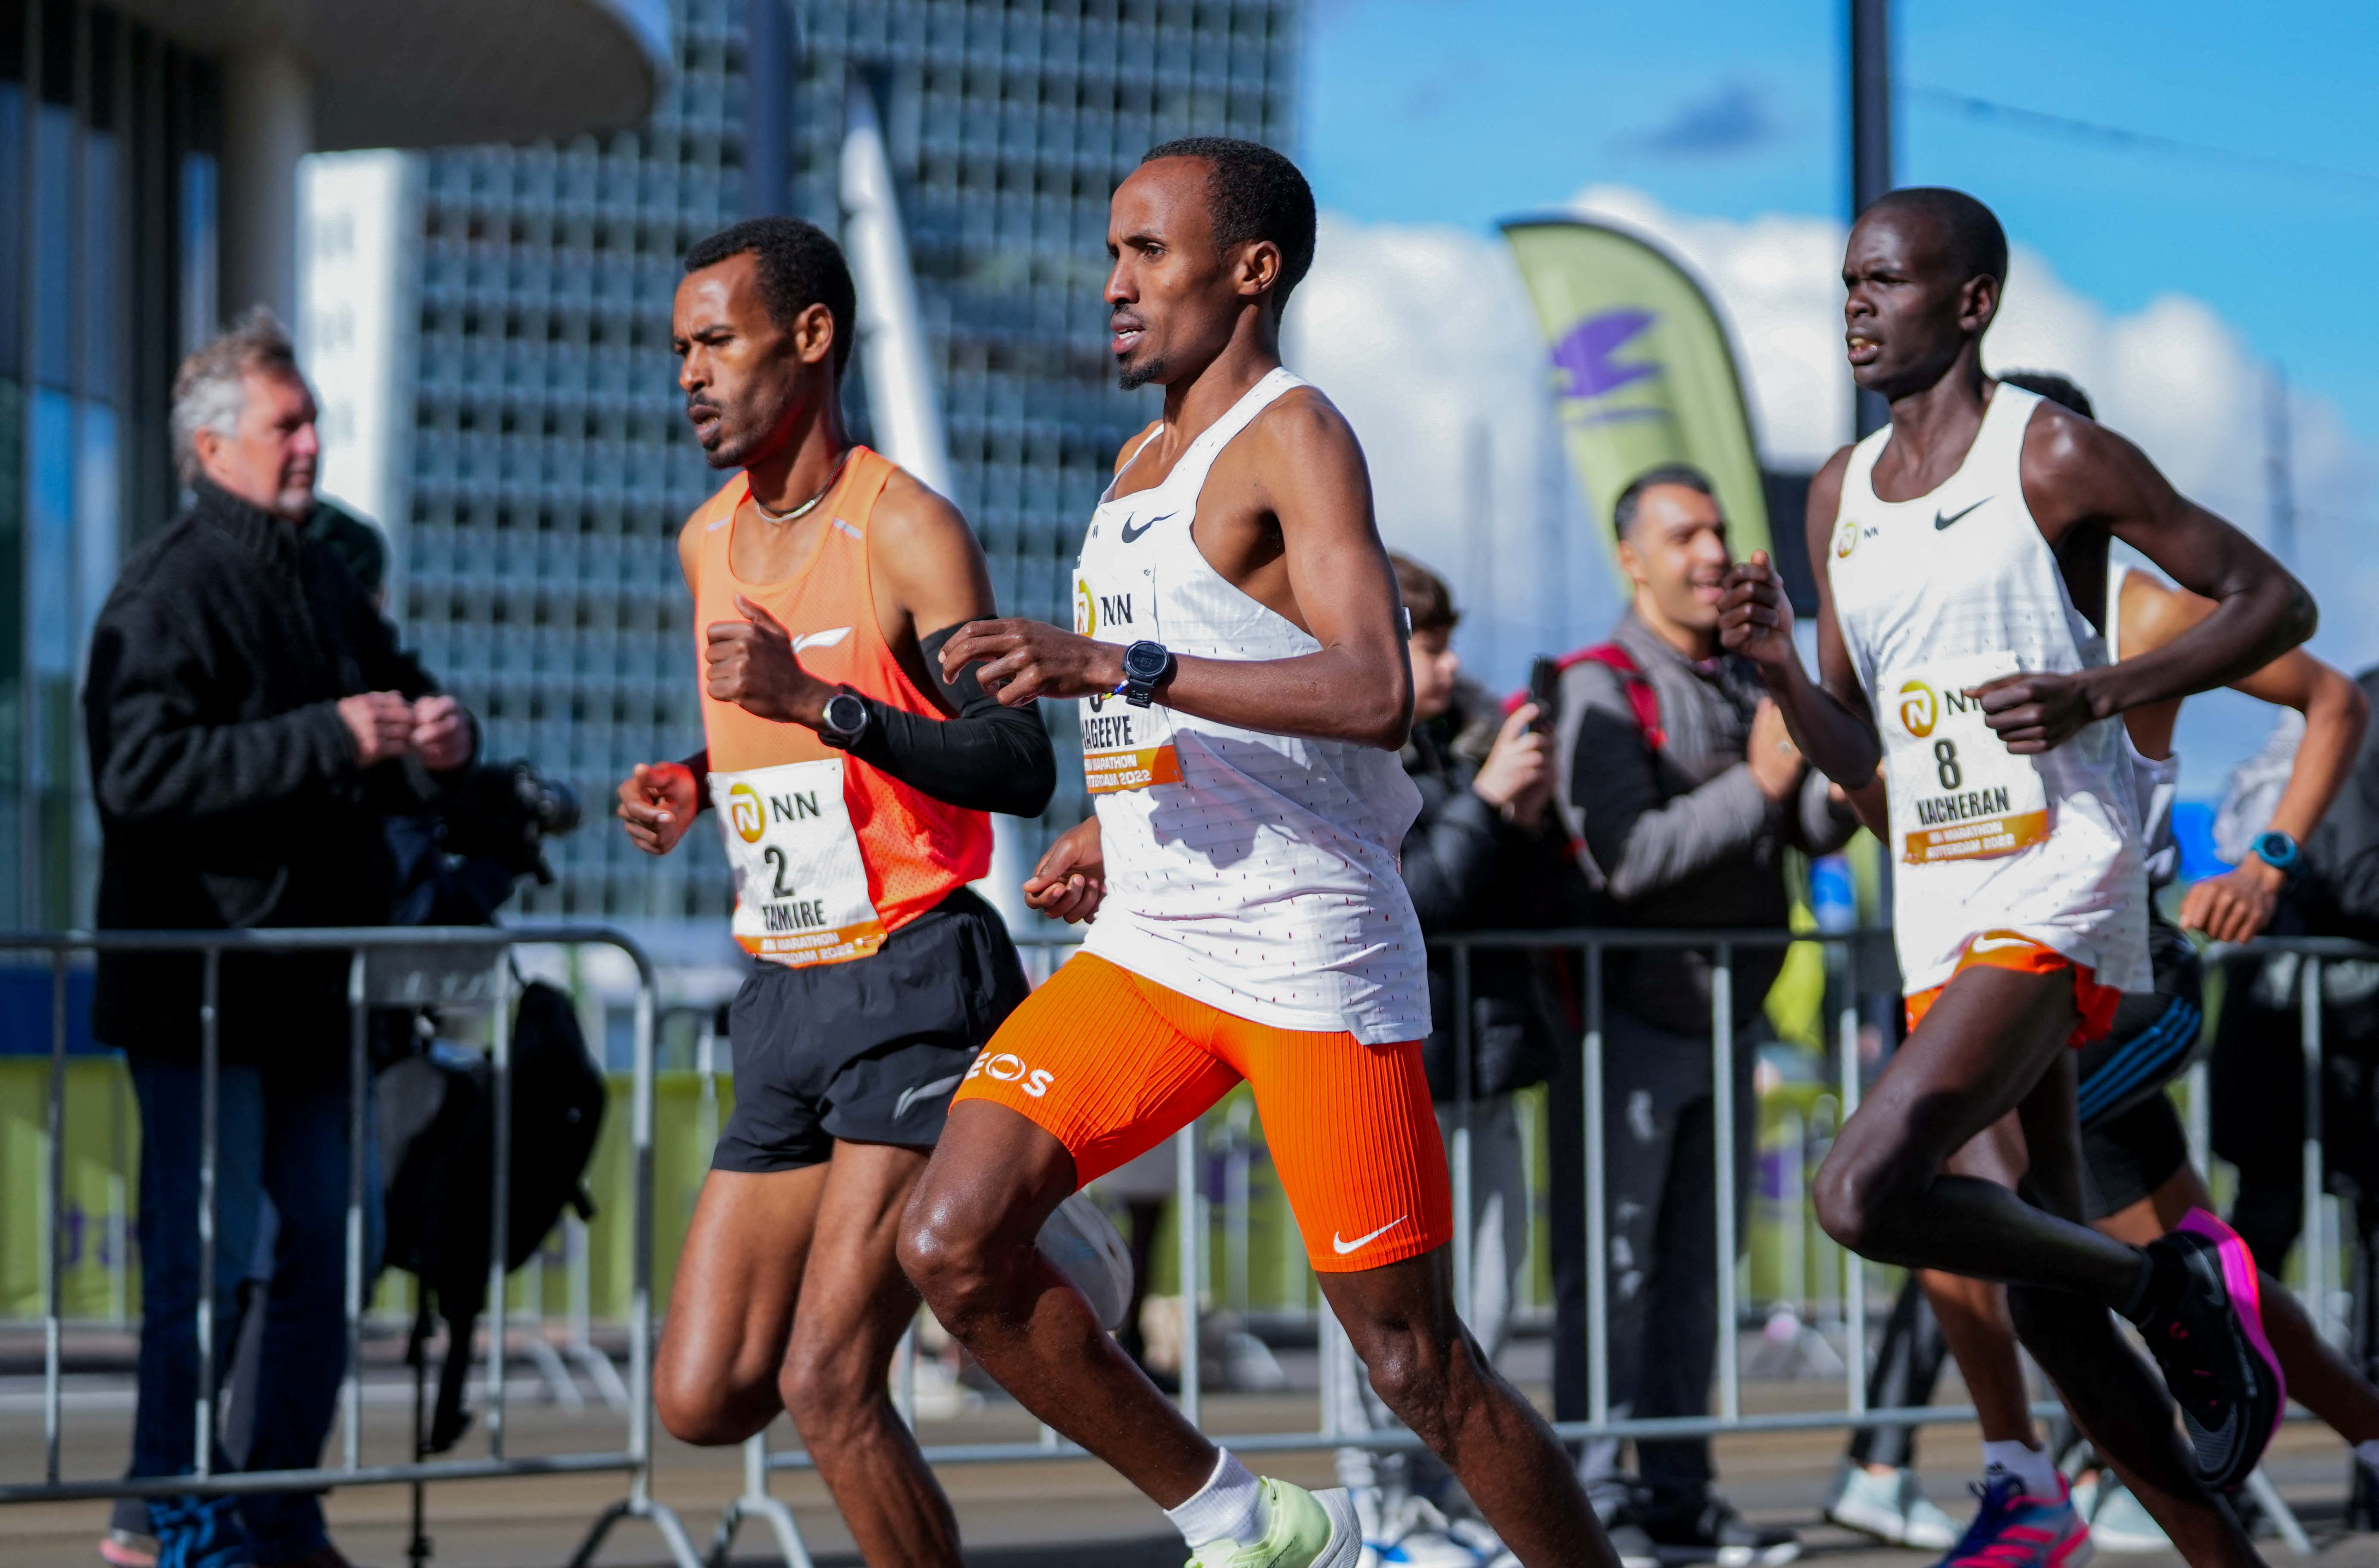 Dutch runner Abdi Nageeye wears a CGM (continuous glucose monitor) on his upper left arm as he competes in the 2022 Rotterdam marathon, in Rotterdam